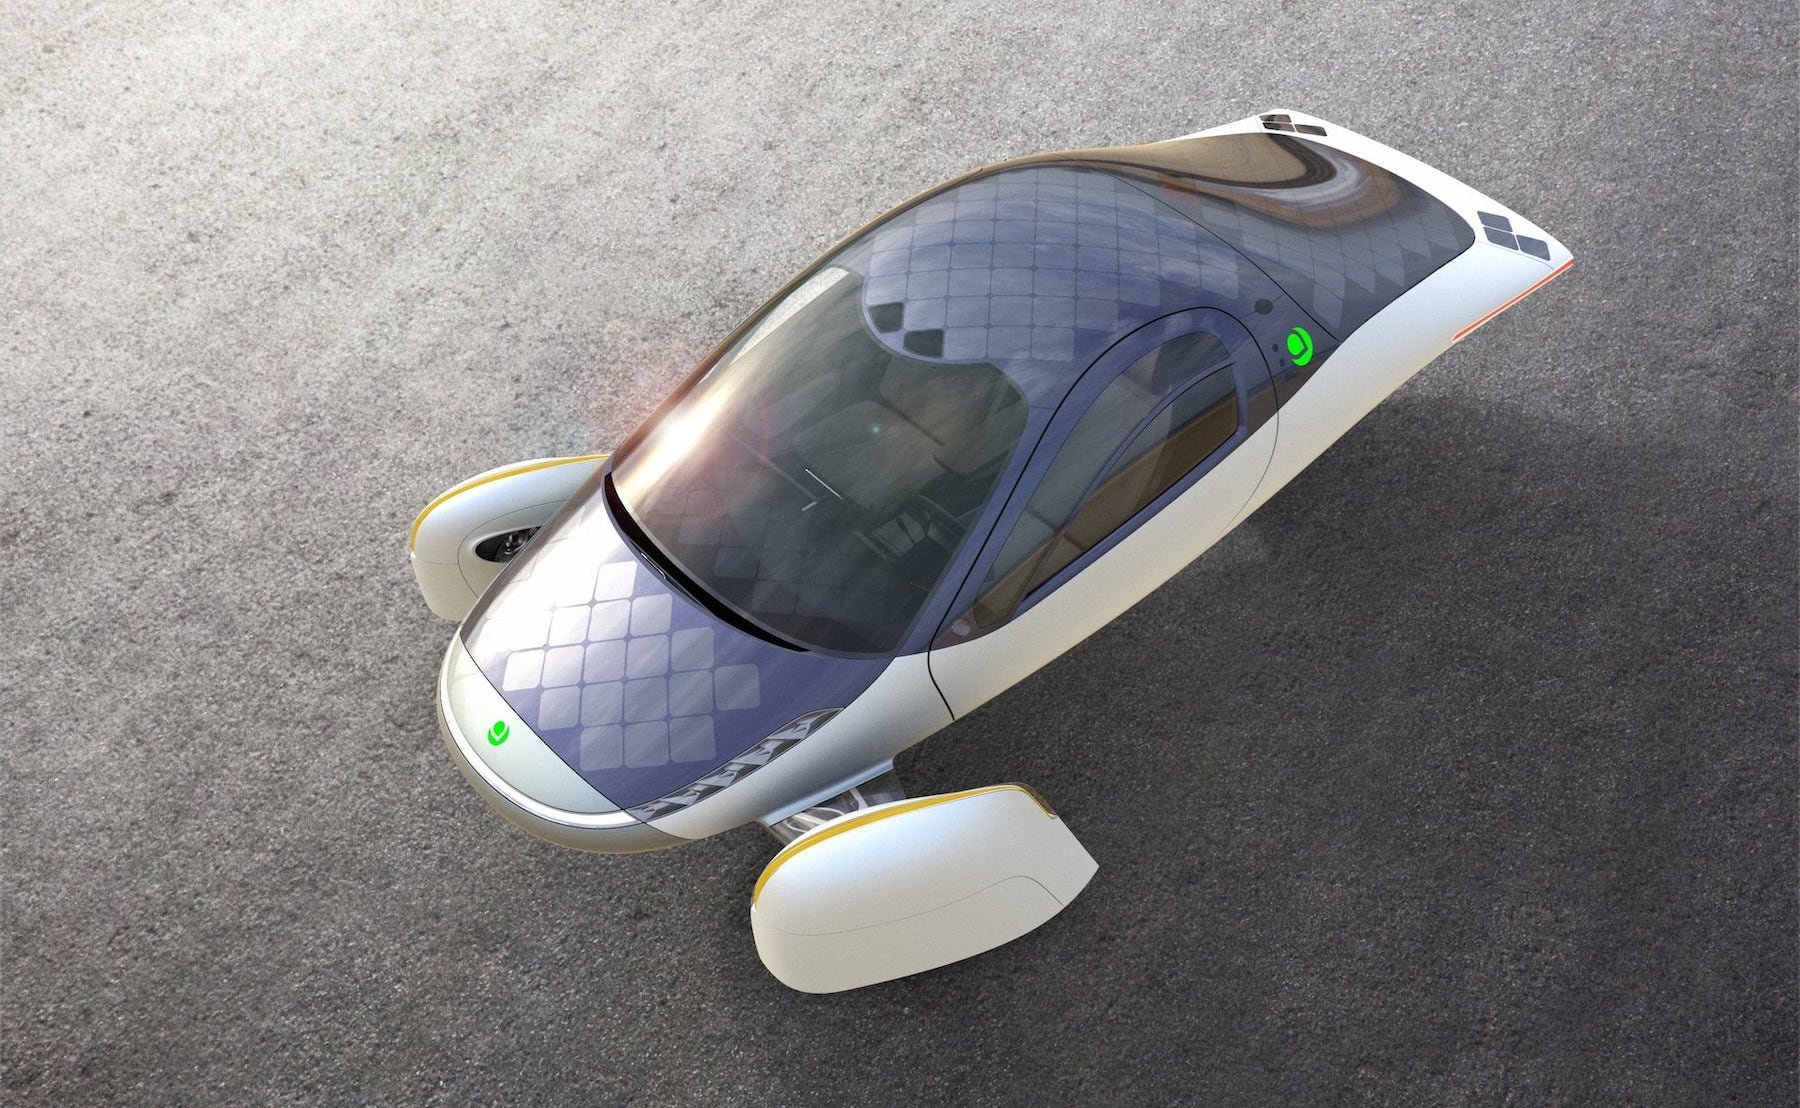 Aptera Solar-Charging Electric Vehicle travels 1,000 miles on a single charge